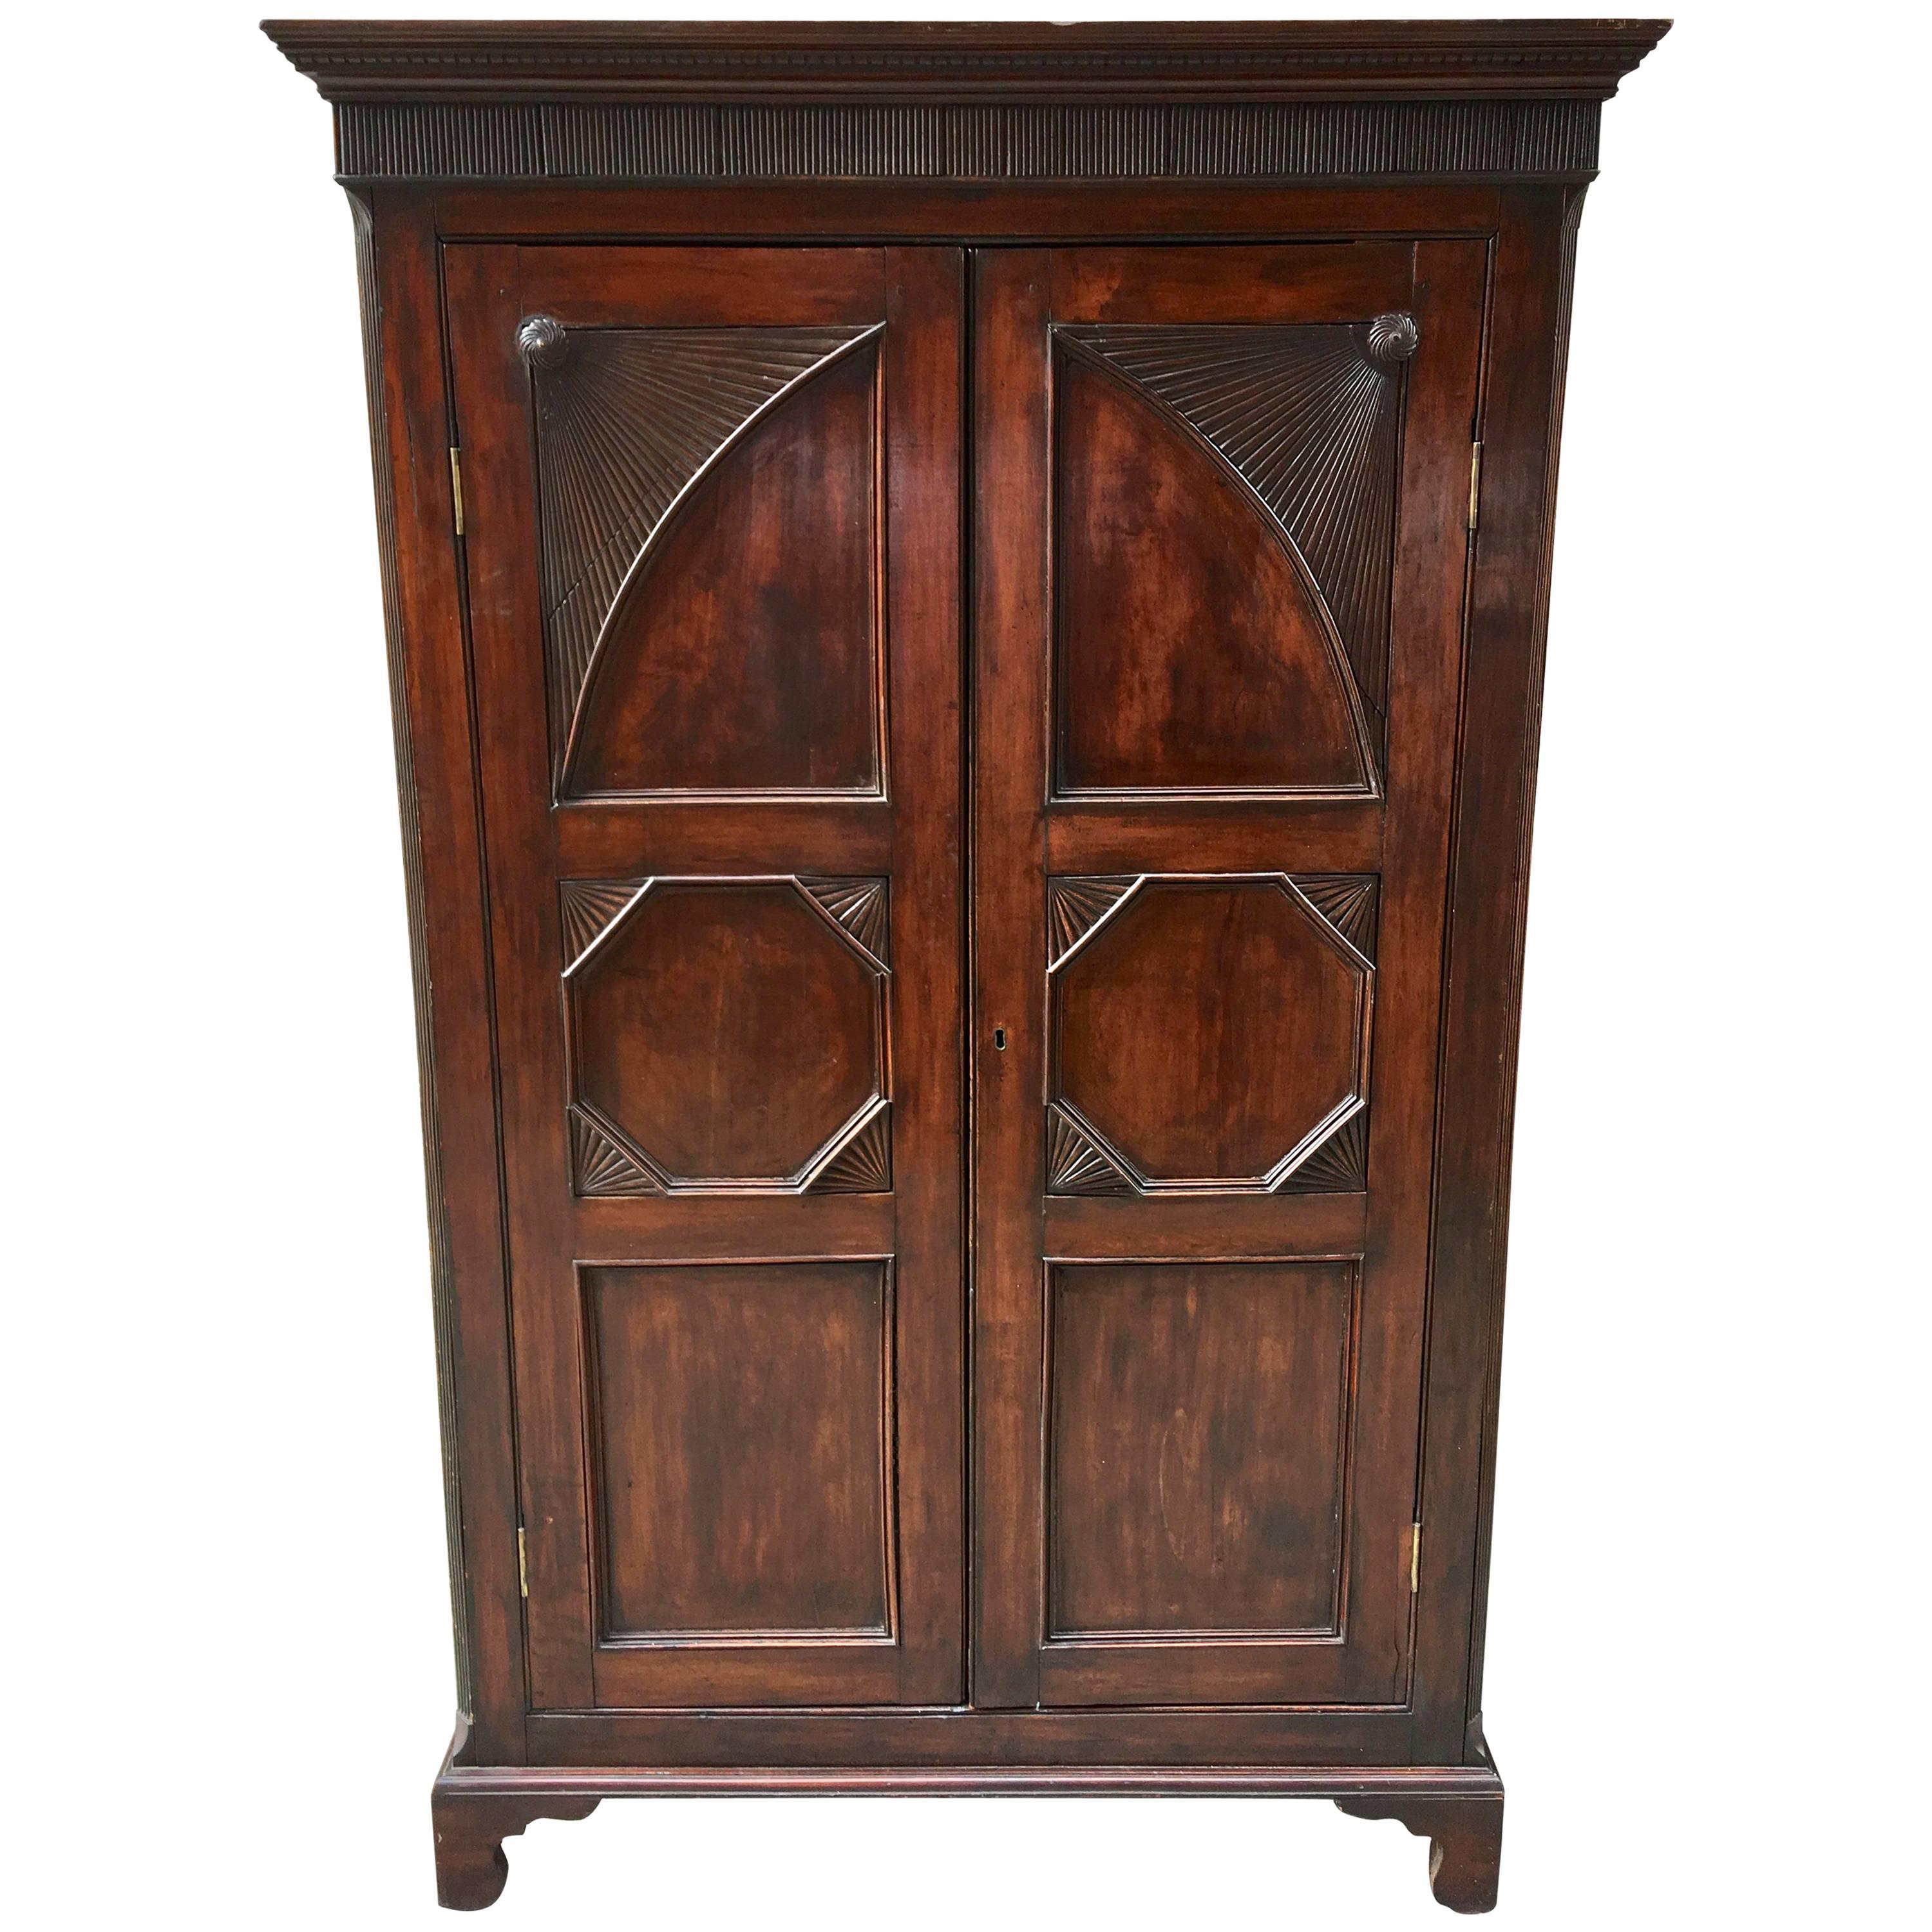 West Indian Mahogany Small-Scale Armoire with Bottom Drawers, circa 1820